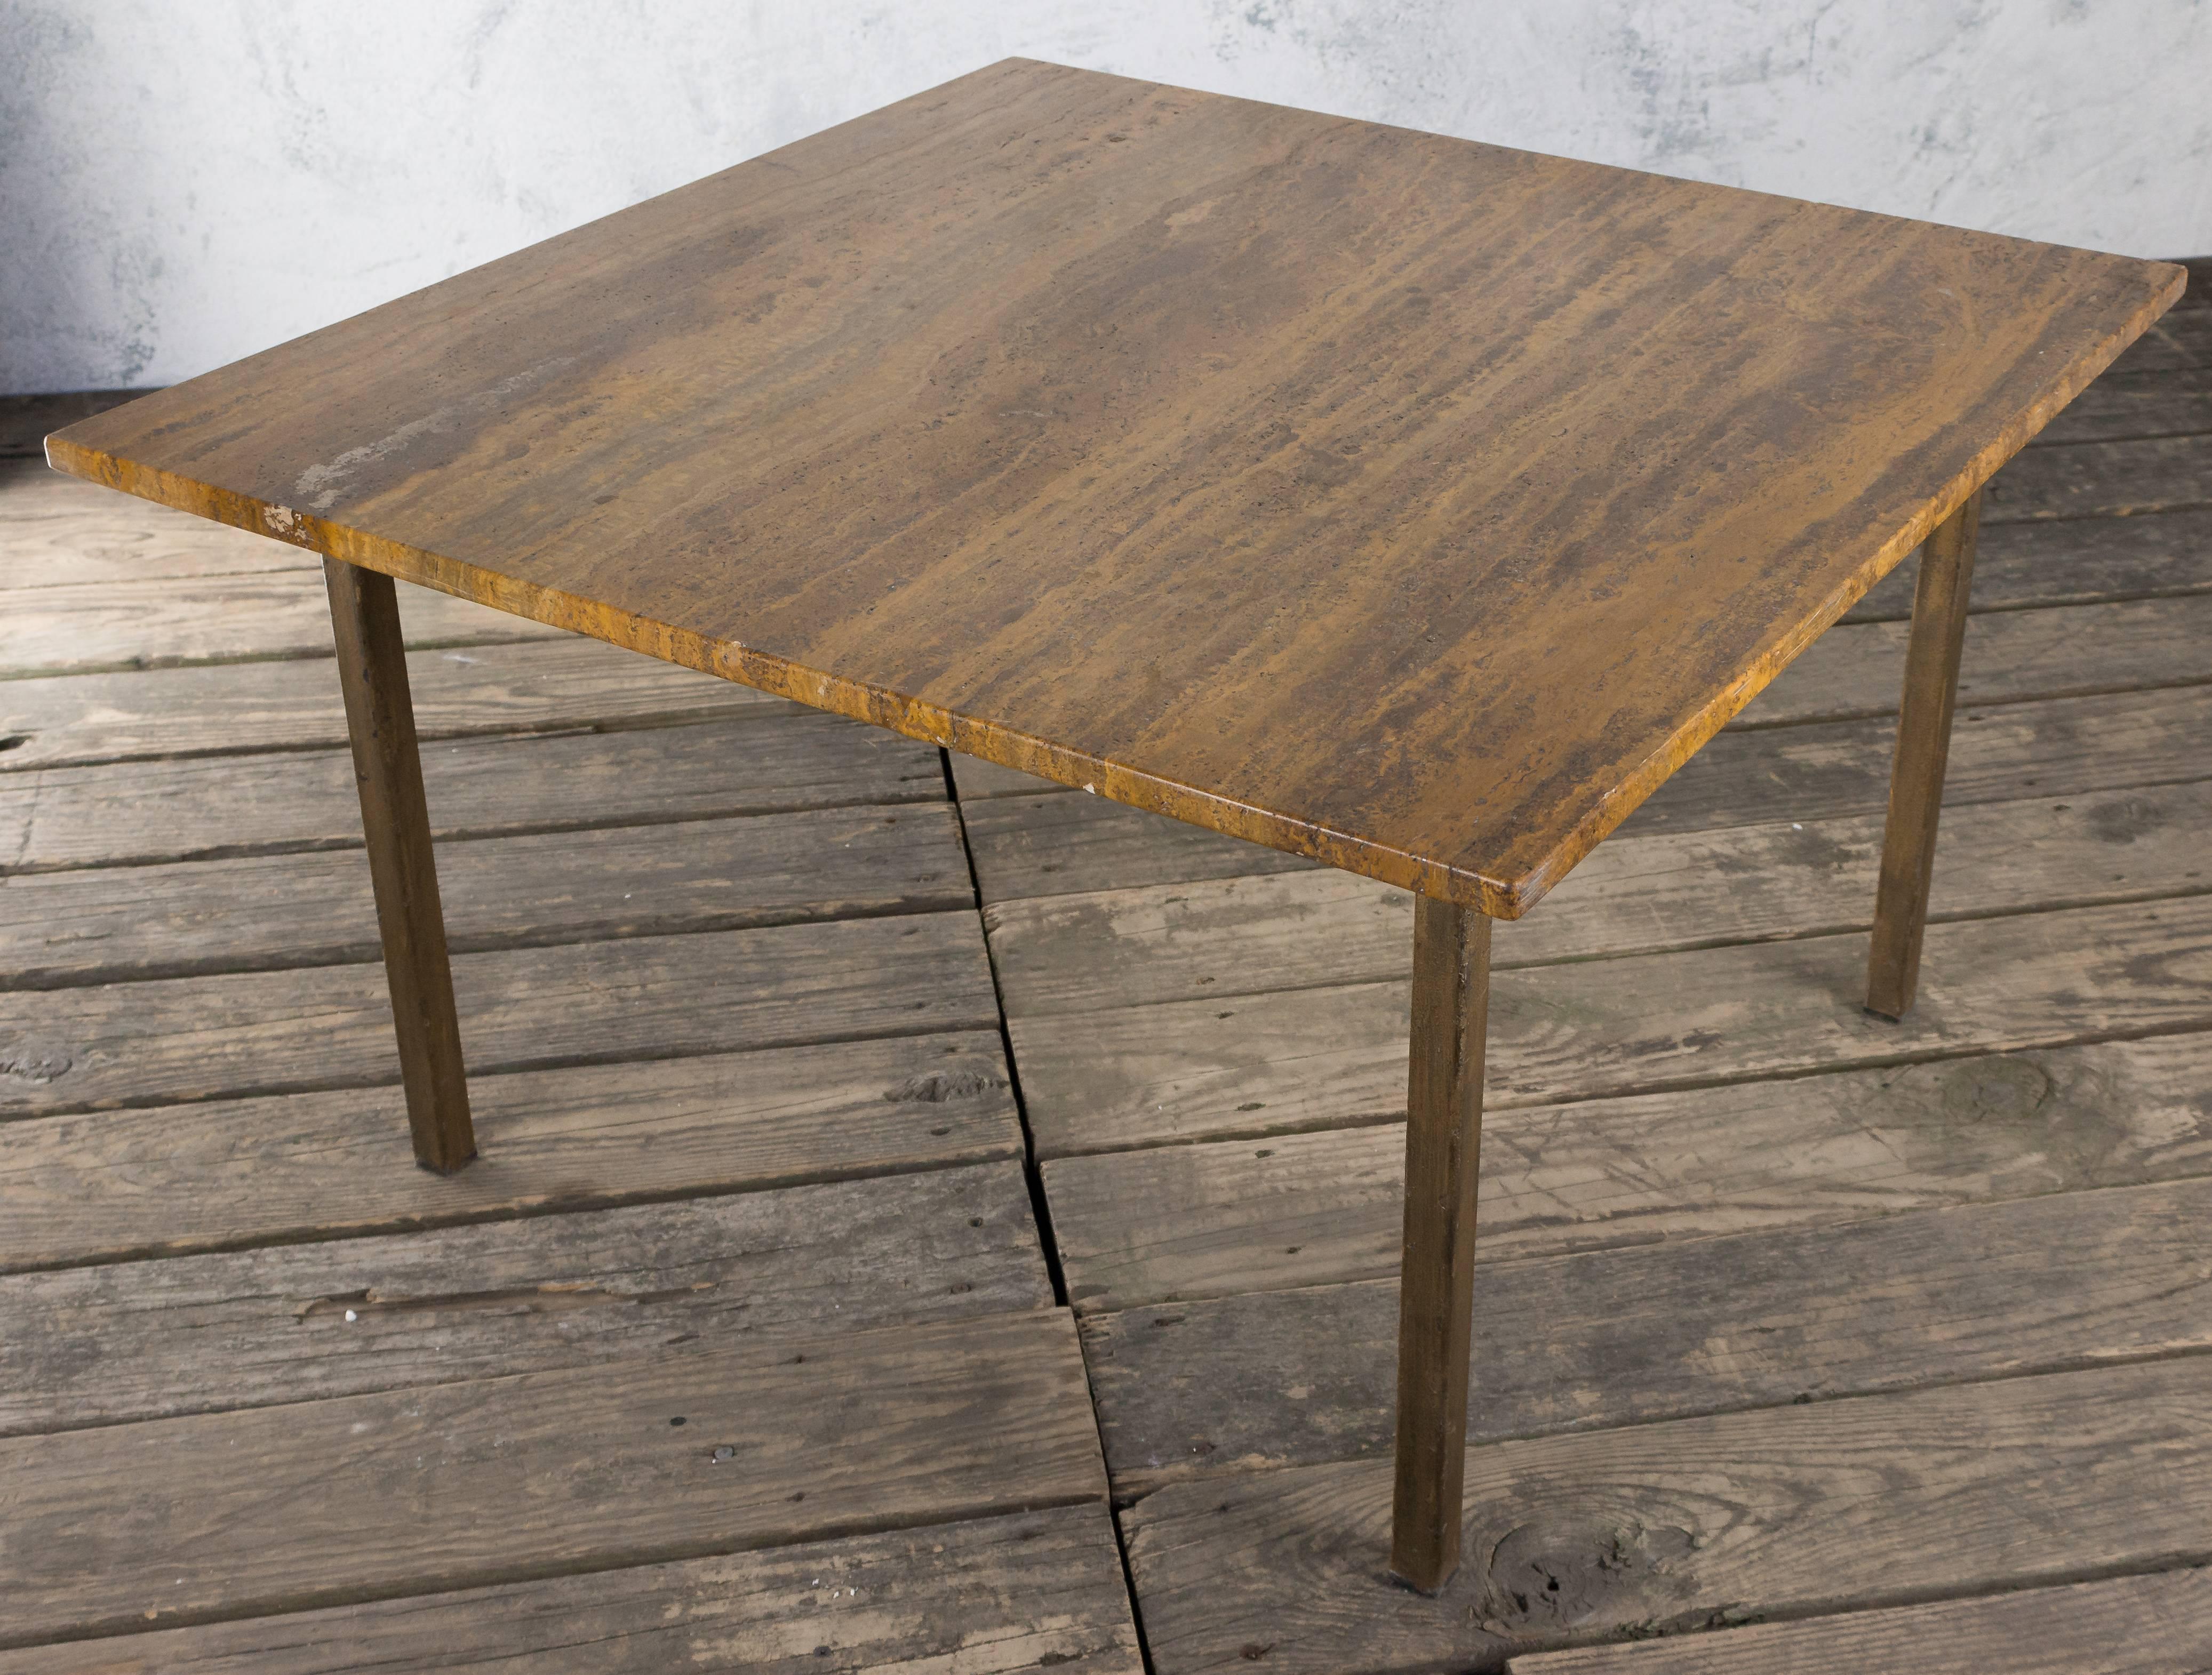 Gilt iron square coffee table with amber marble top.
French, 1980s.